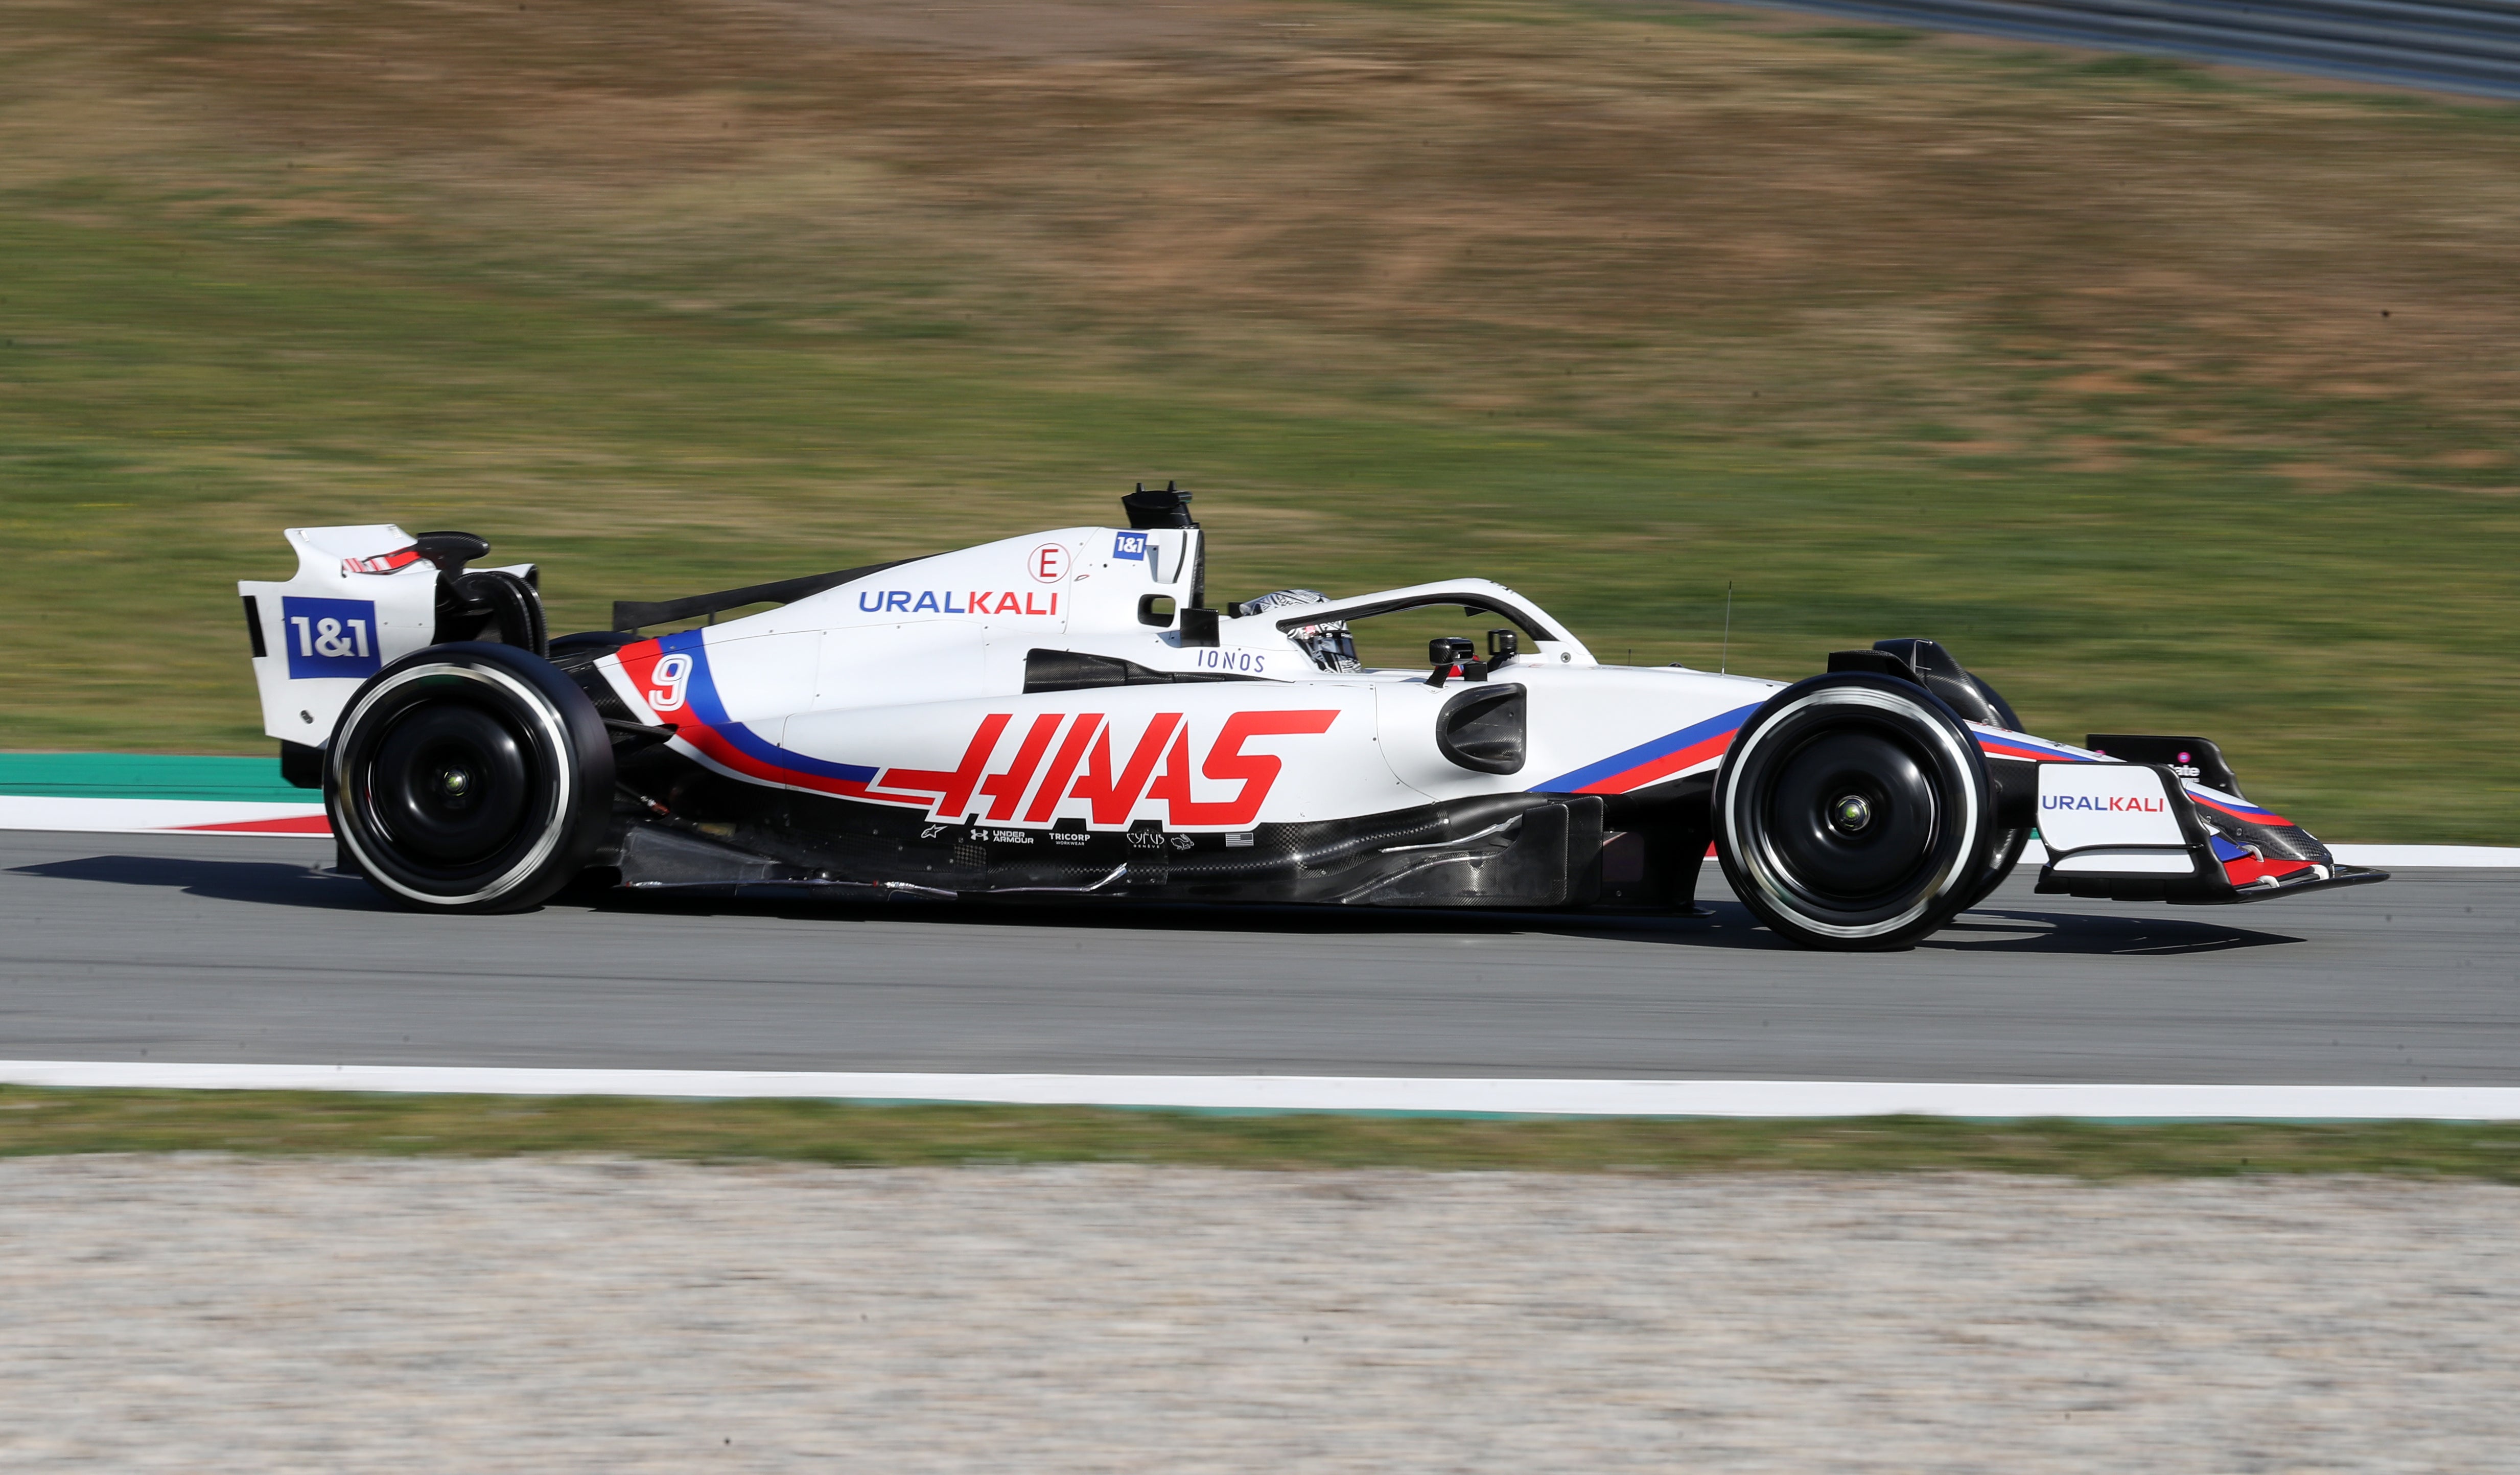 Russian driver Nikita Mazepin's F1 contract terminated by Haas team, Formula One